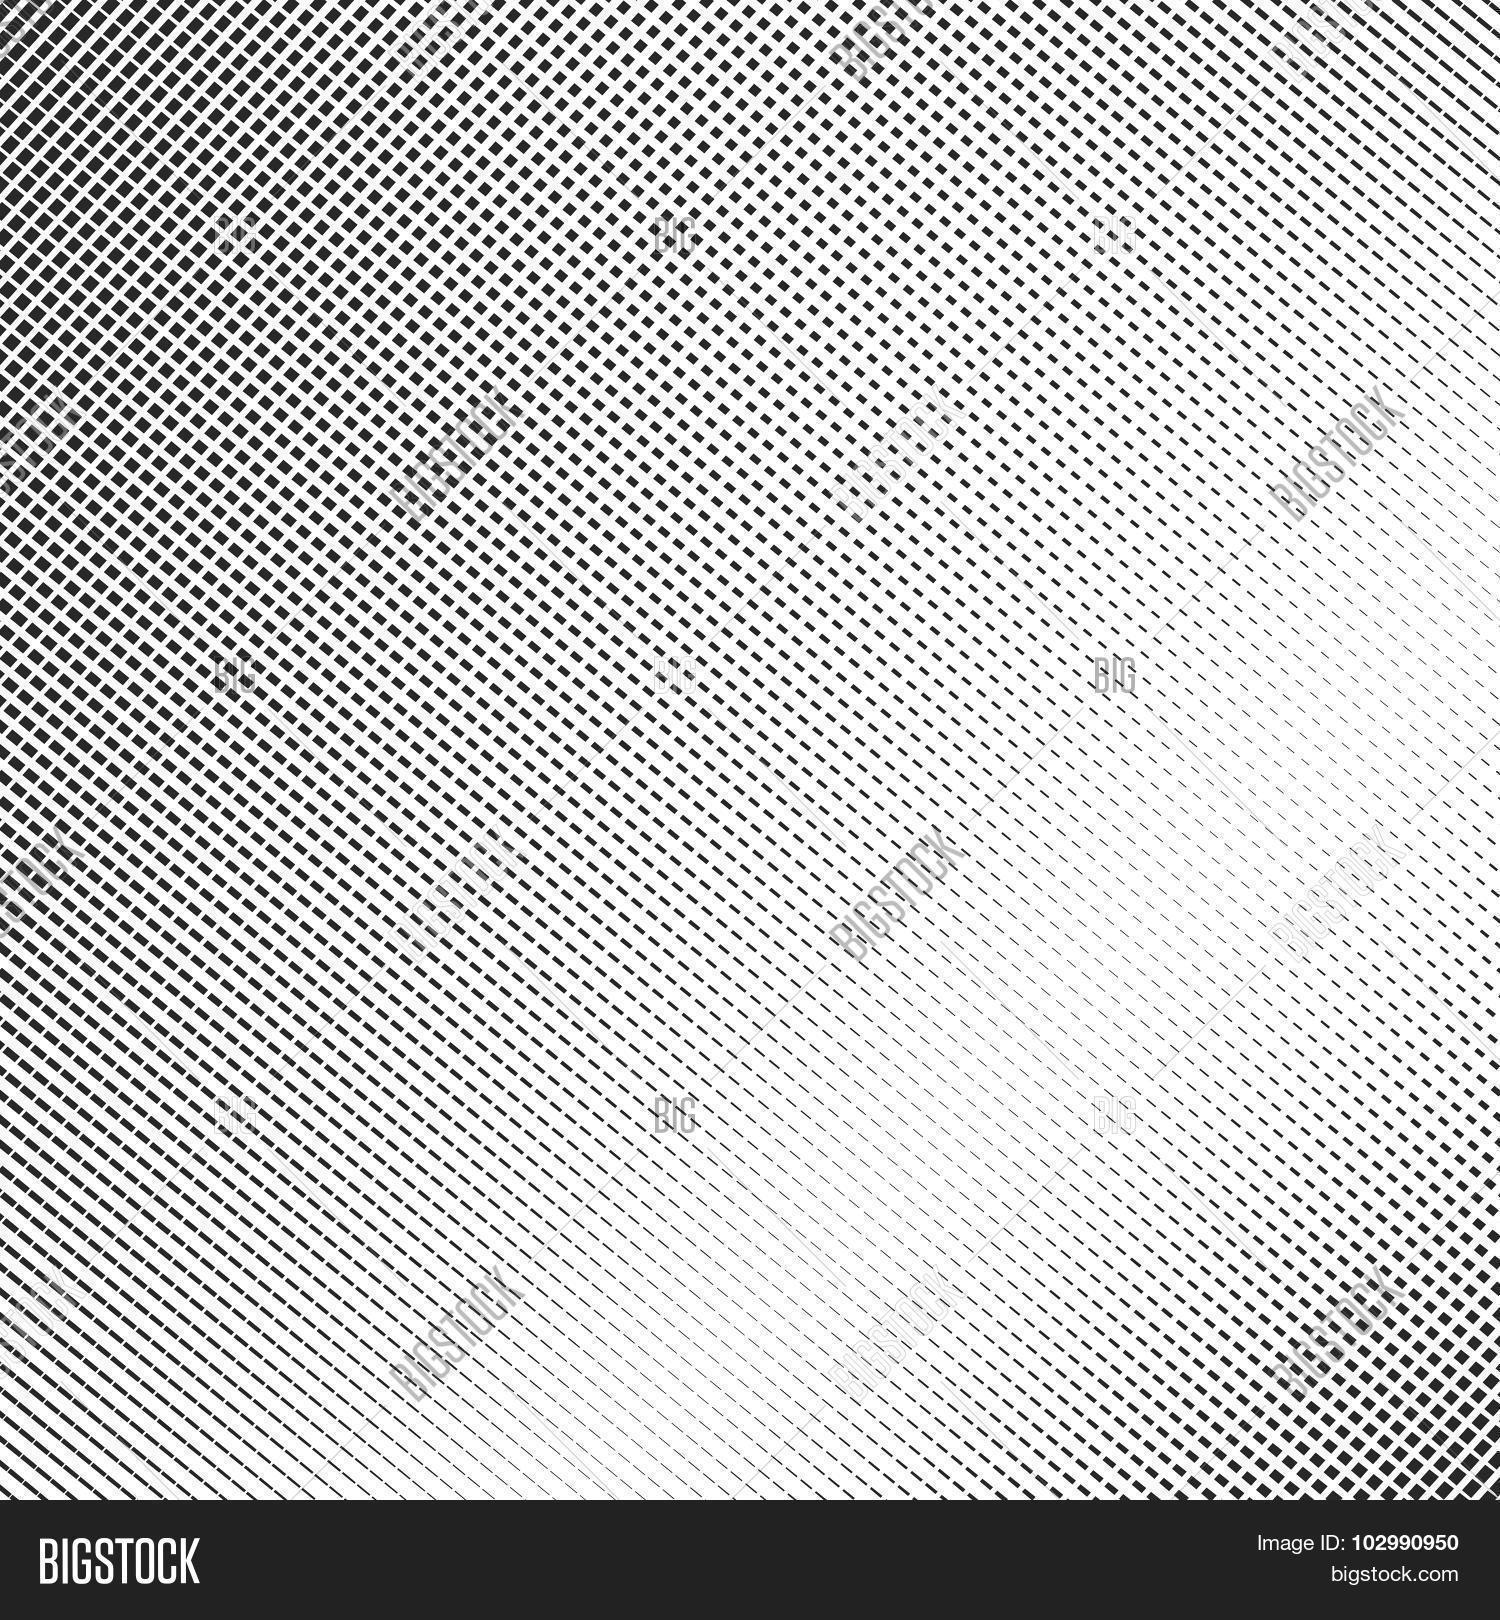 Dots Background, Old Dotted Vector & Photo | Bigstock